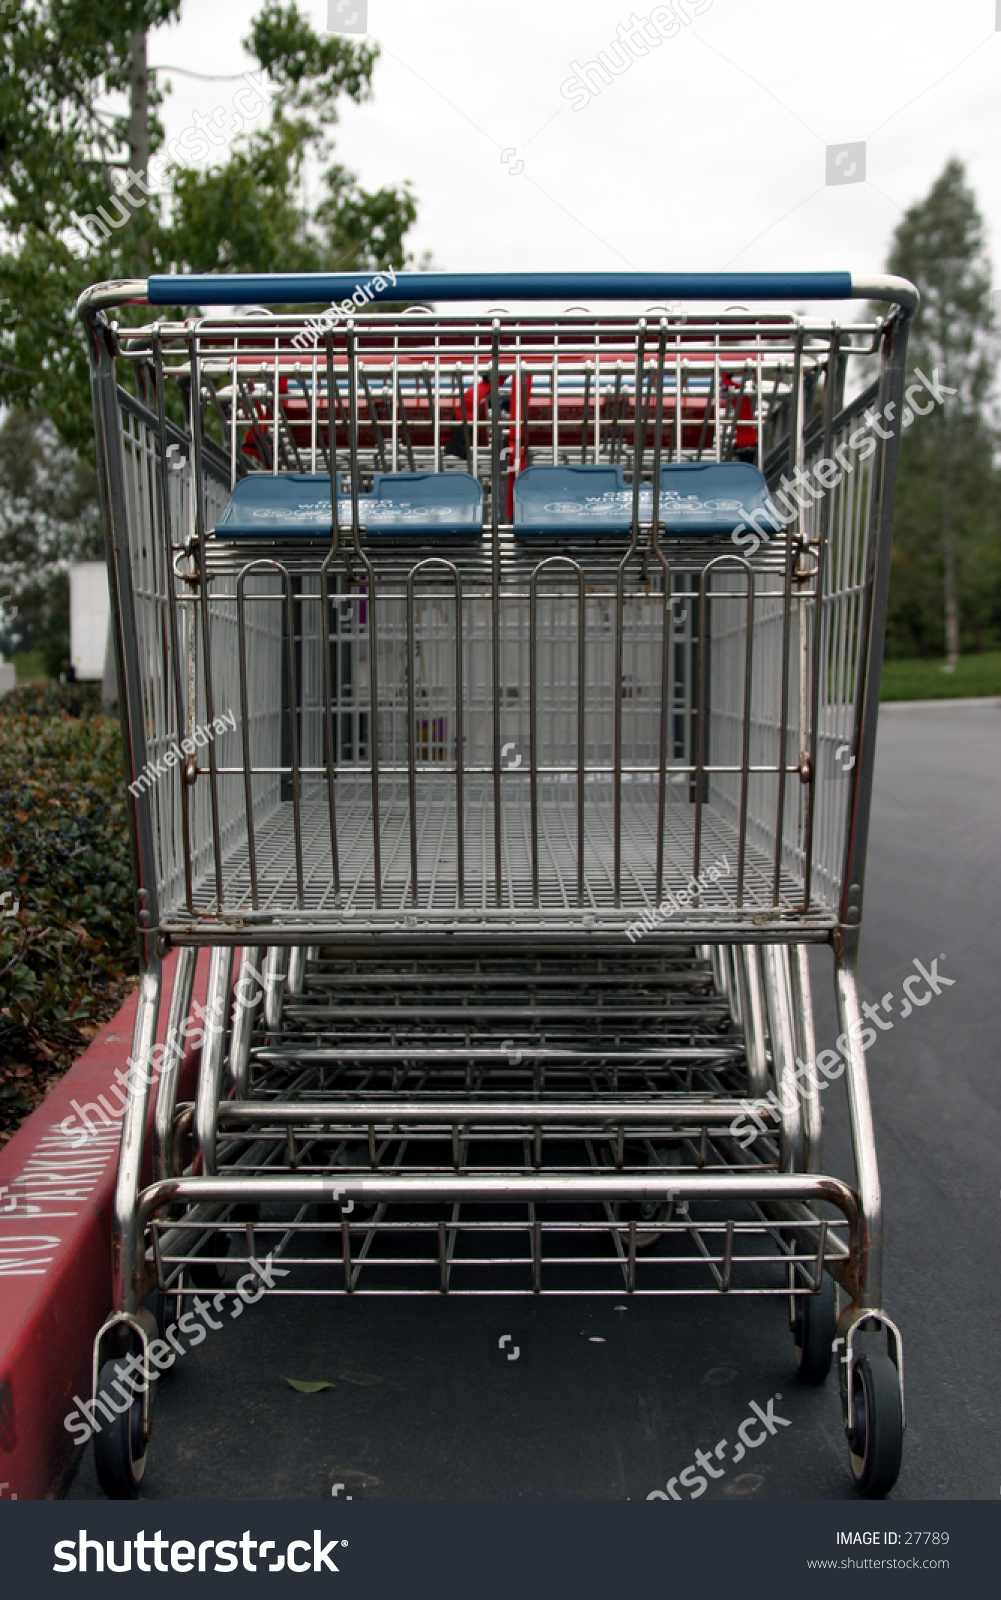 Shopping Carts Lined Up In A Parking Lot Stock Photo 27789 : Shutterstock